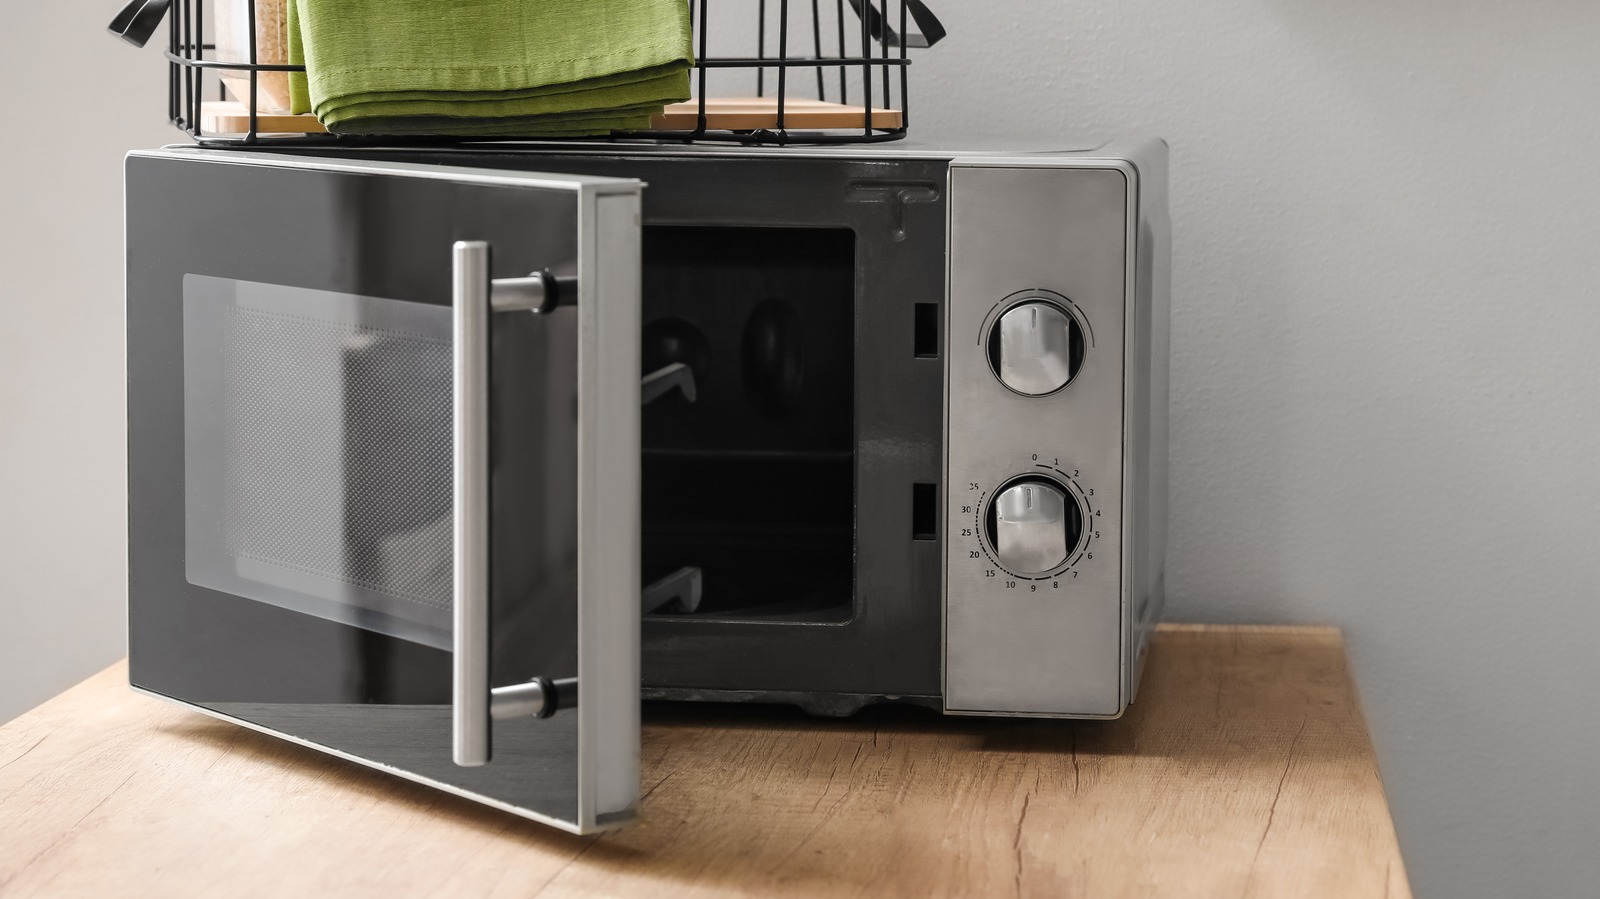 Stainless Steel Microwaves Ranked: Price vs Features, Spencer's TV &  Appliance